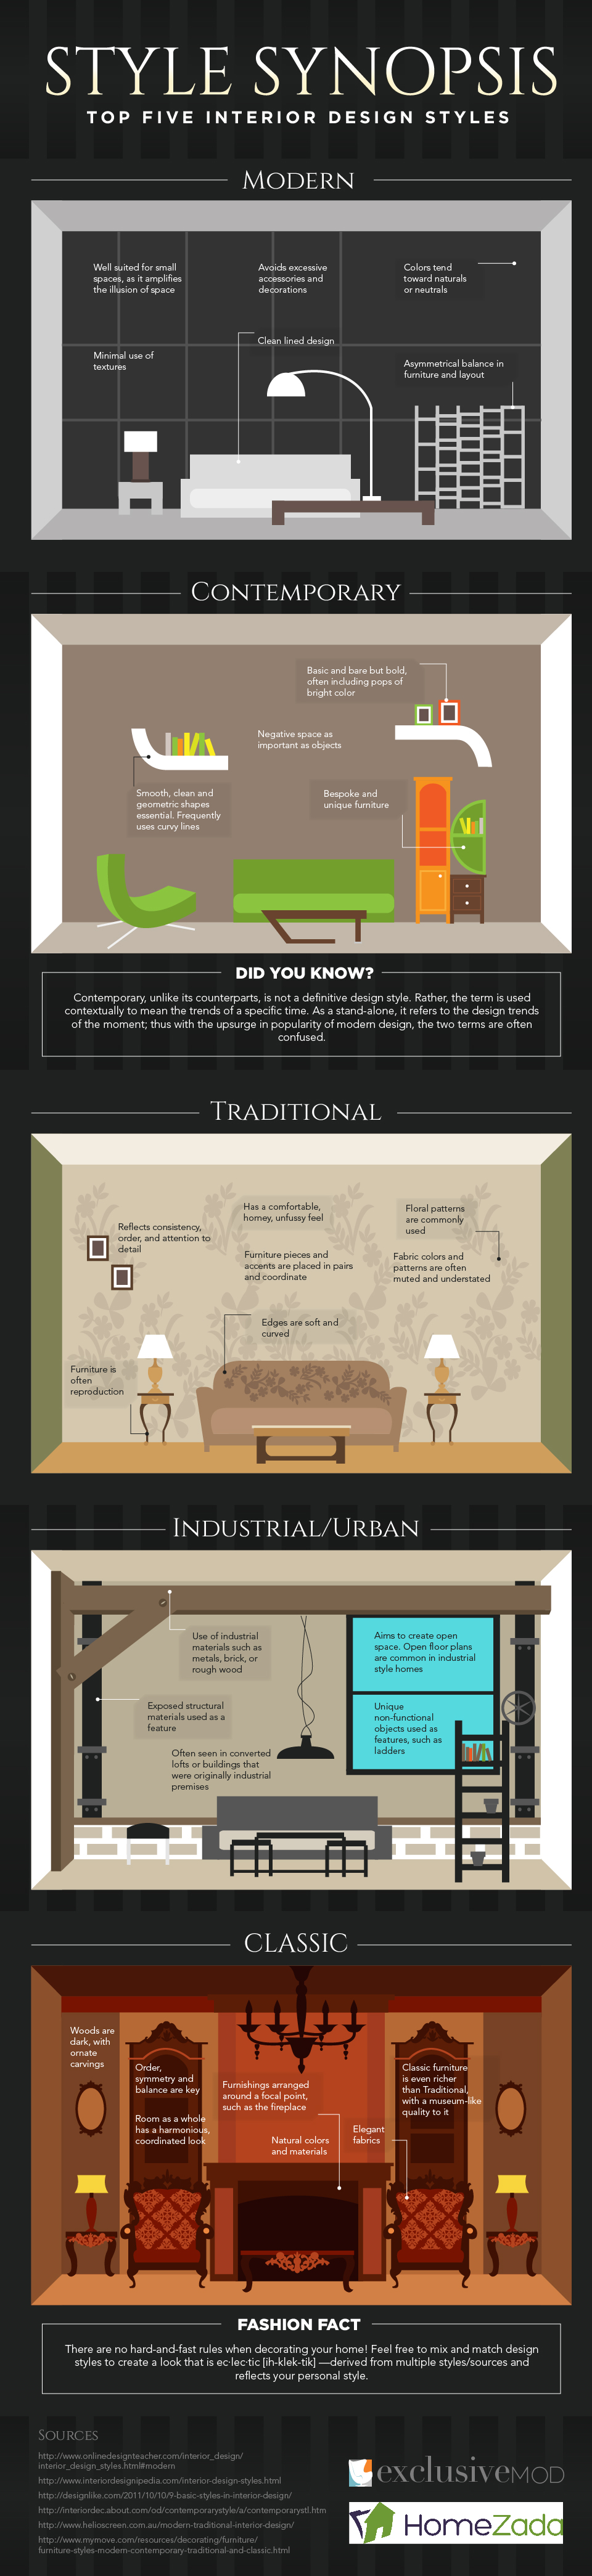 Style Synopsis: The Top 5 Interior Design Styles